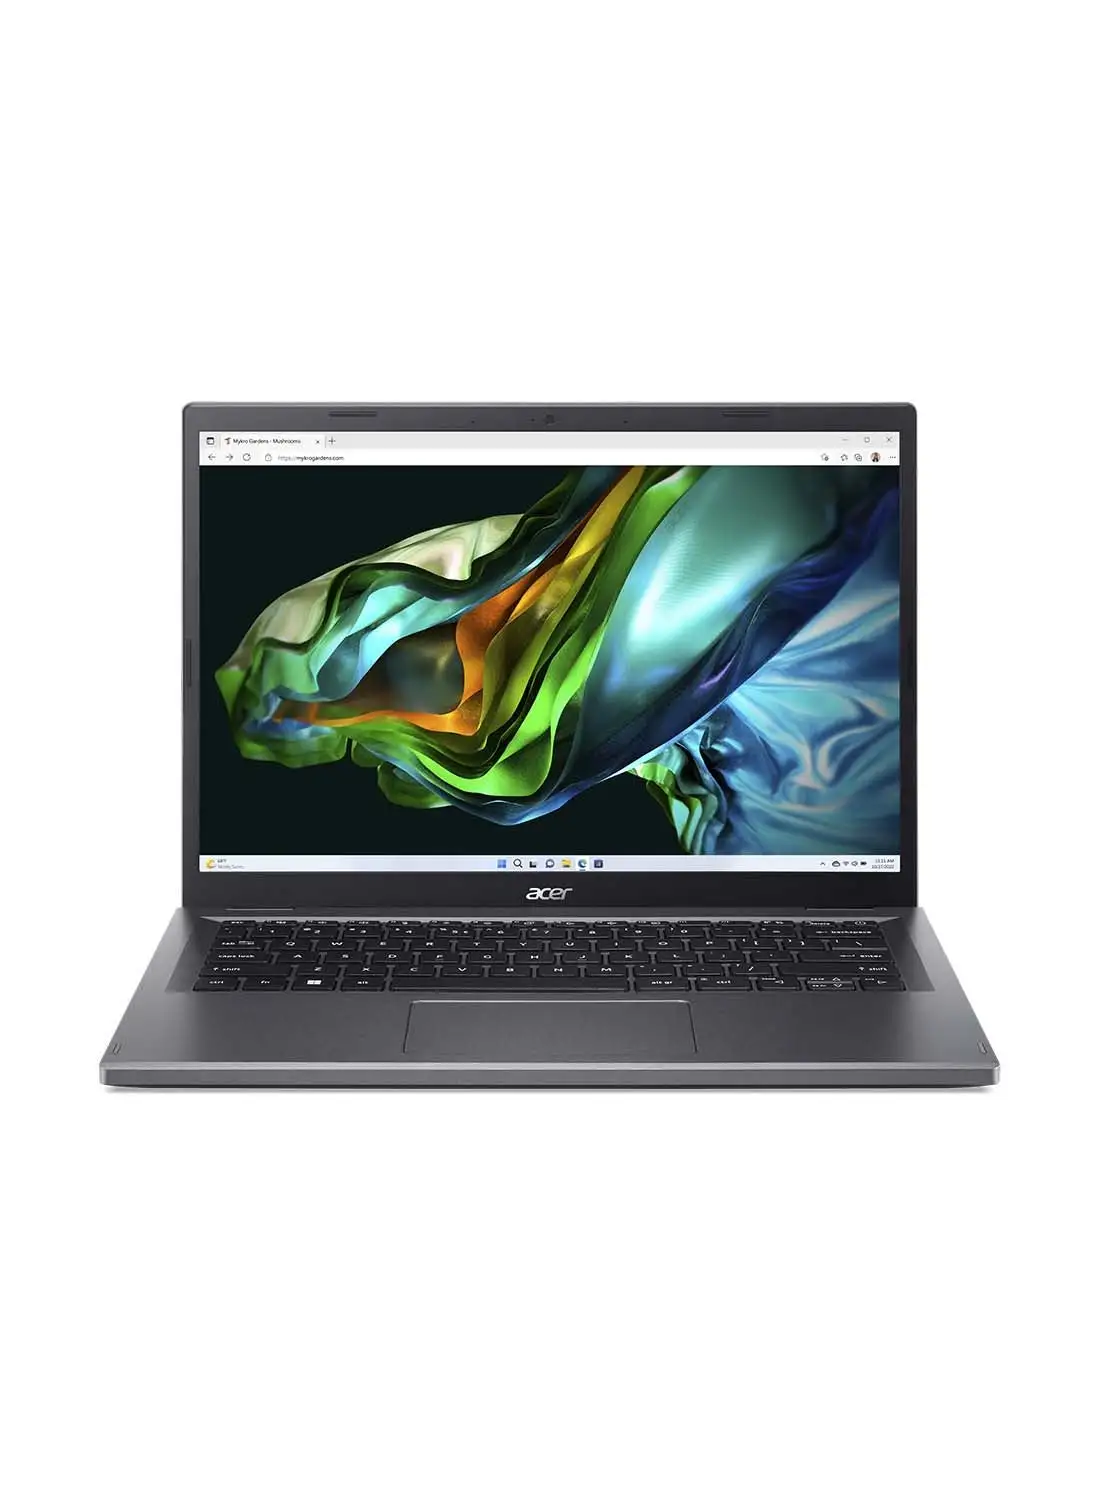 Acer Aspire 5 A515 Notebook With 13th Gen Intel Core i7-13620H 10 Cores Upto 4.9GHz/16GB DDR4 RAM/1TB SSD Storage/4GB Nvidia RTX2050 Graphics/15.6 Inch FHD IPS Slim Bezel Display English/Arabic Steel Gray